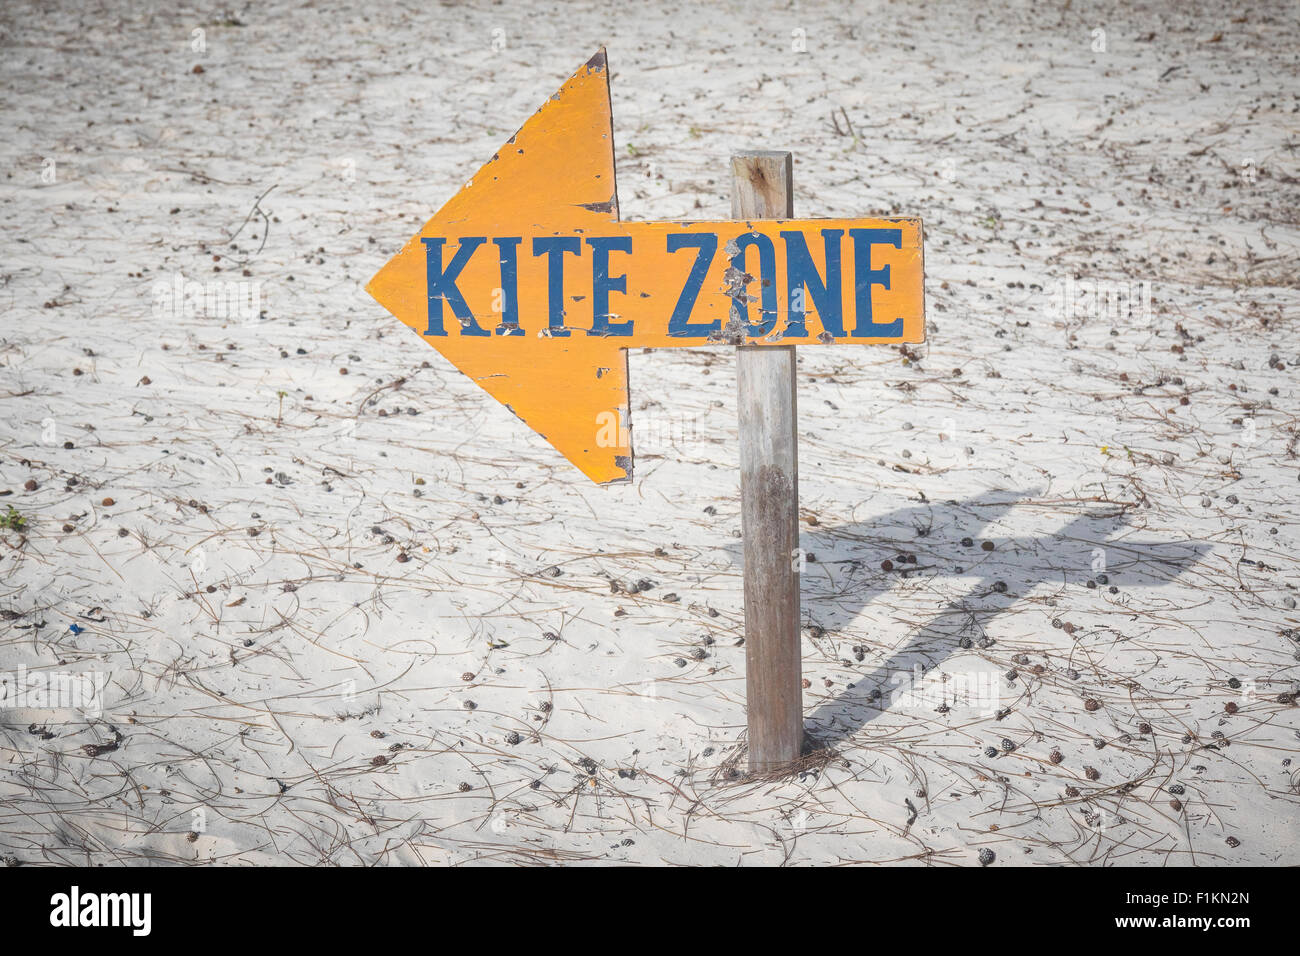 A sign points to the direction of the restricted kite zone area. The sign has a shape of a arrow. Stock Photo